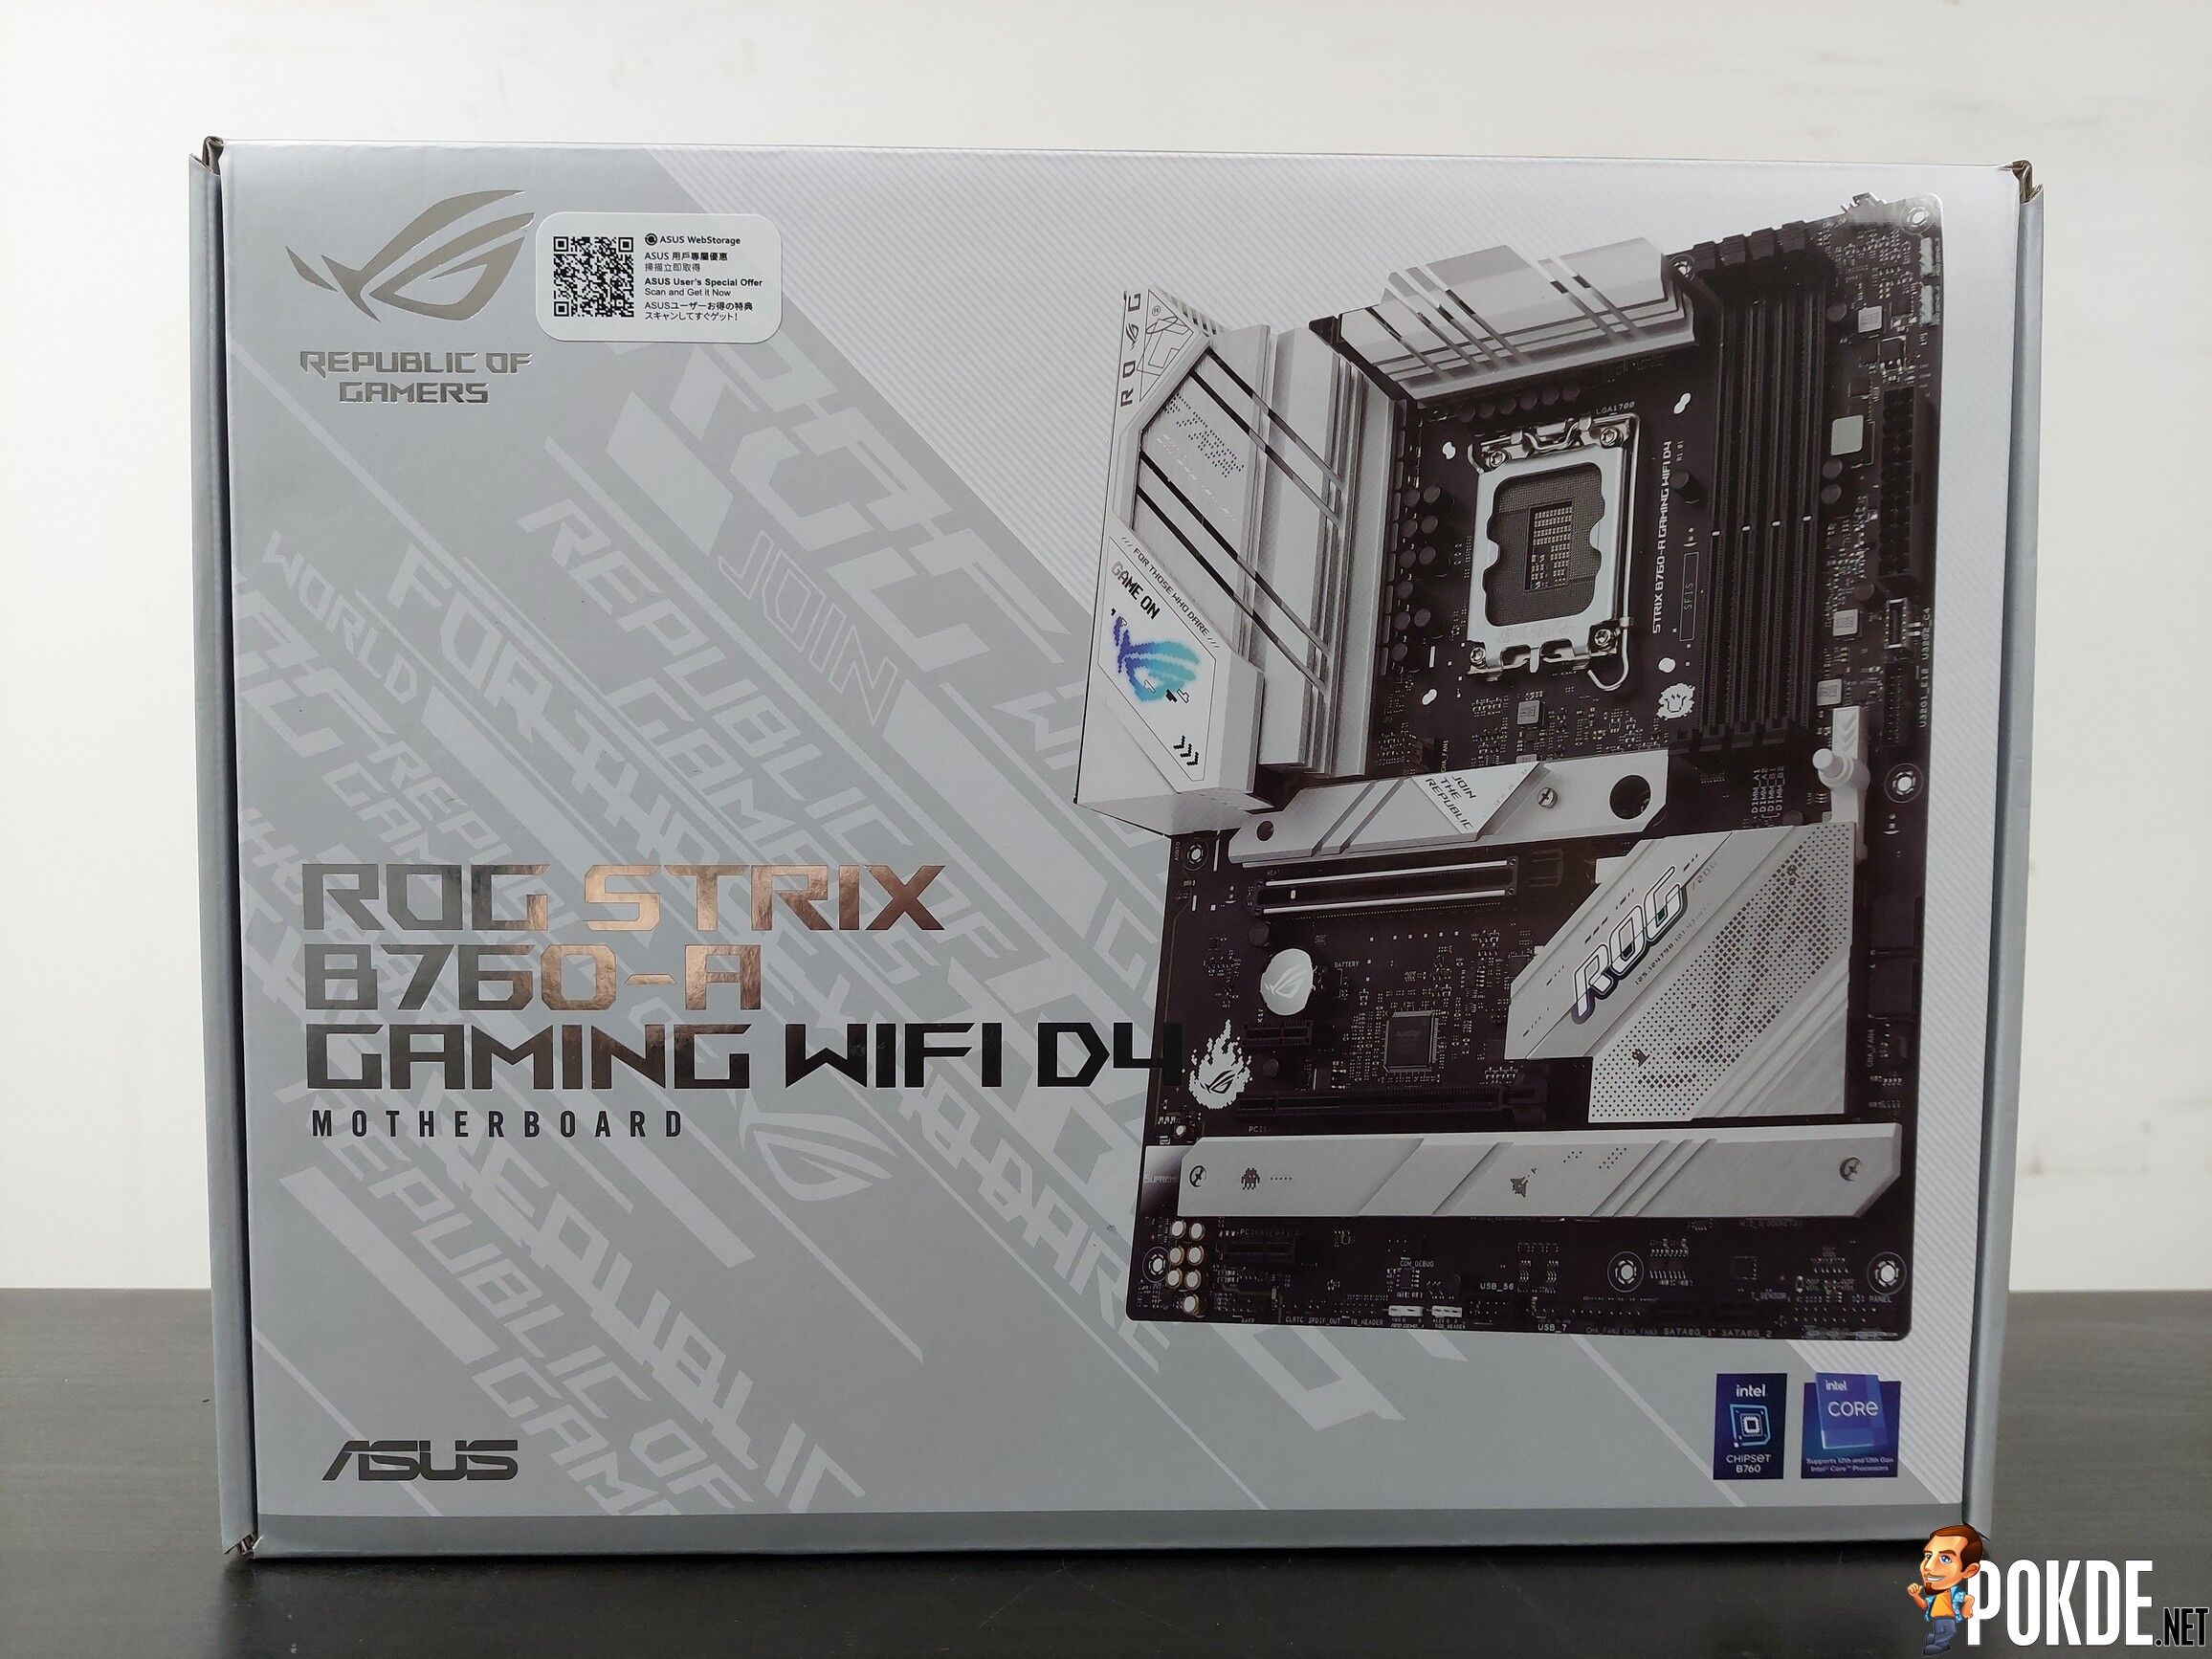 ASUS ROG STRIX B760-A GAMING WIFI D4 Review